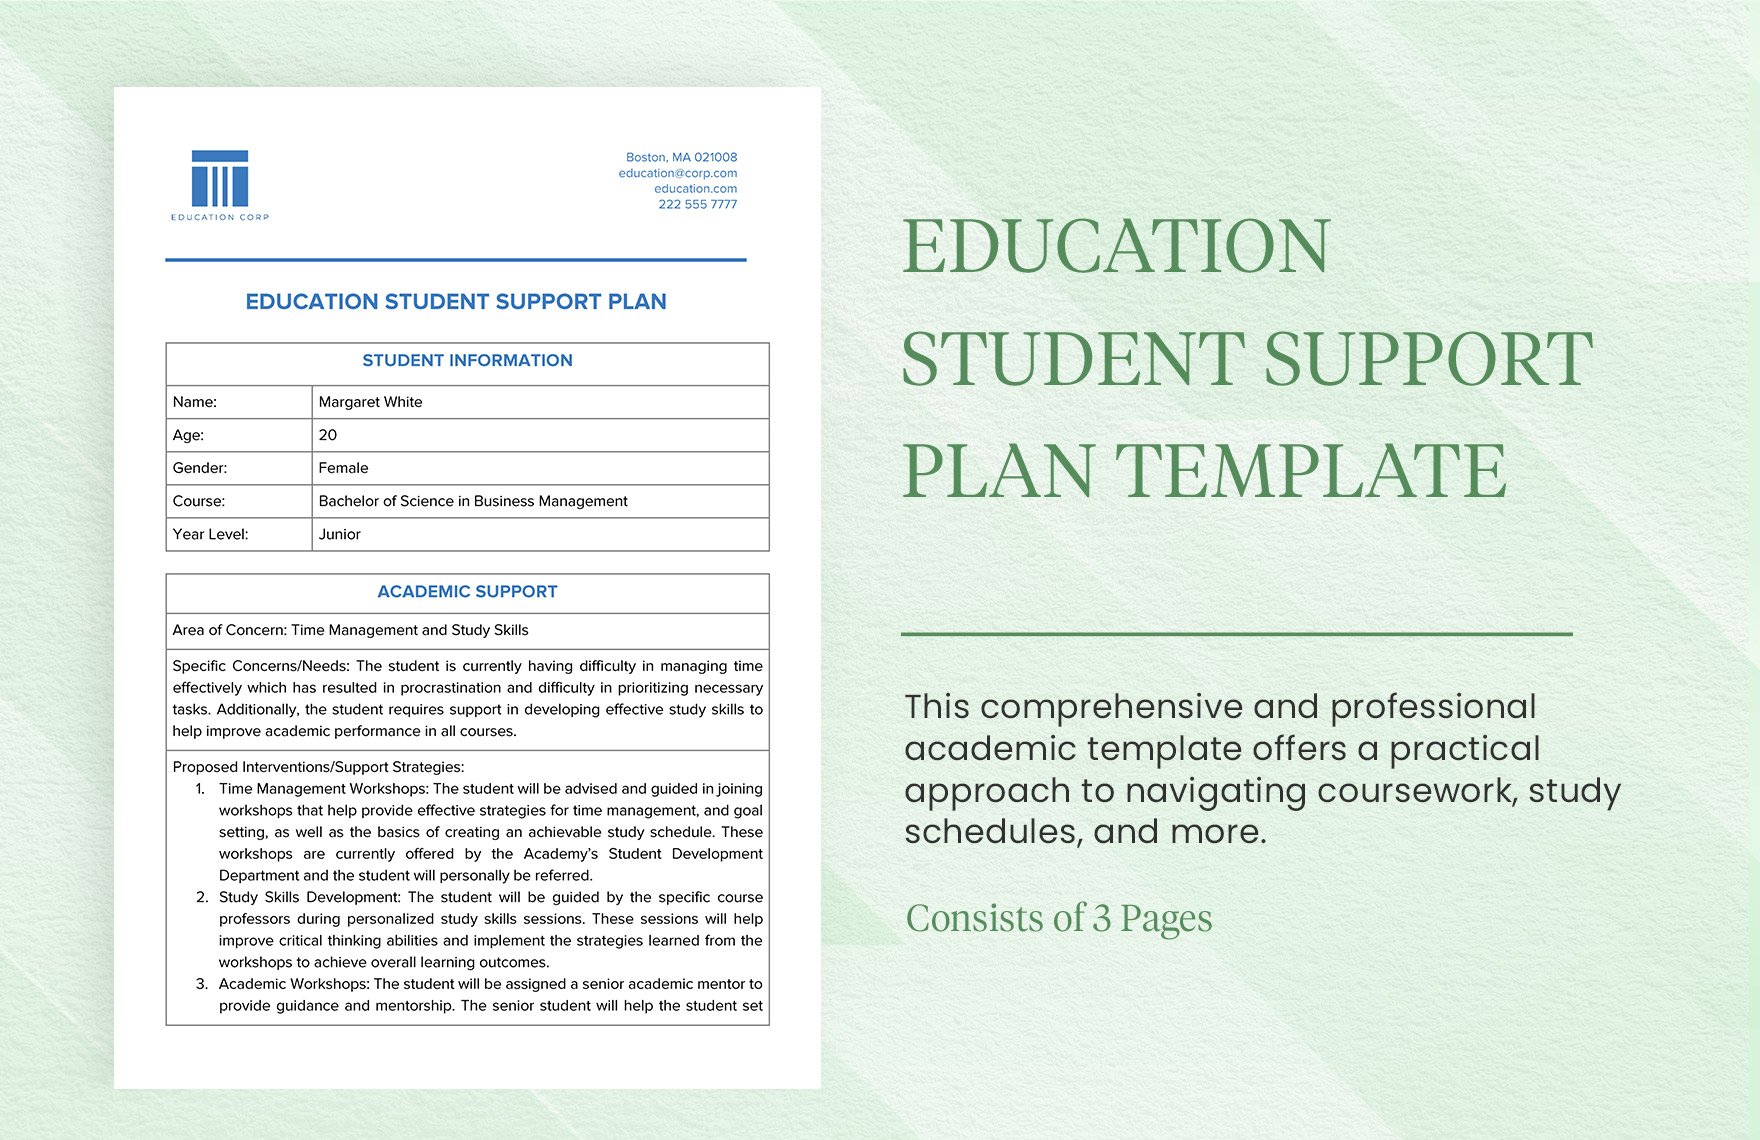 Education Student Support Plan Template in Word, Google Docs, PDF